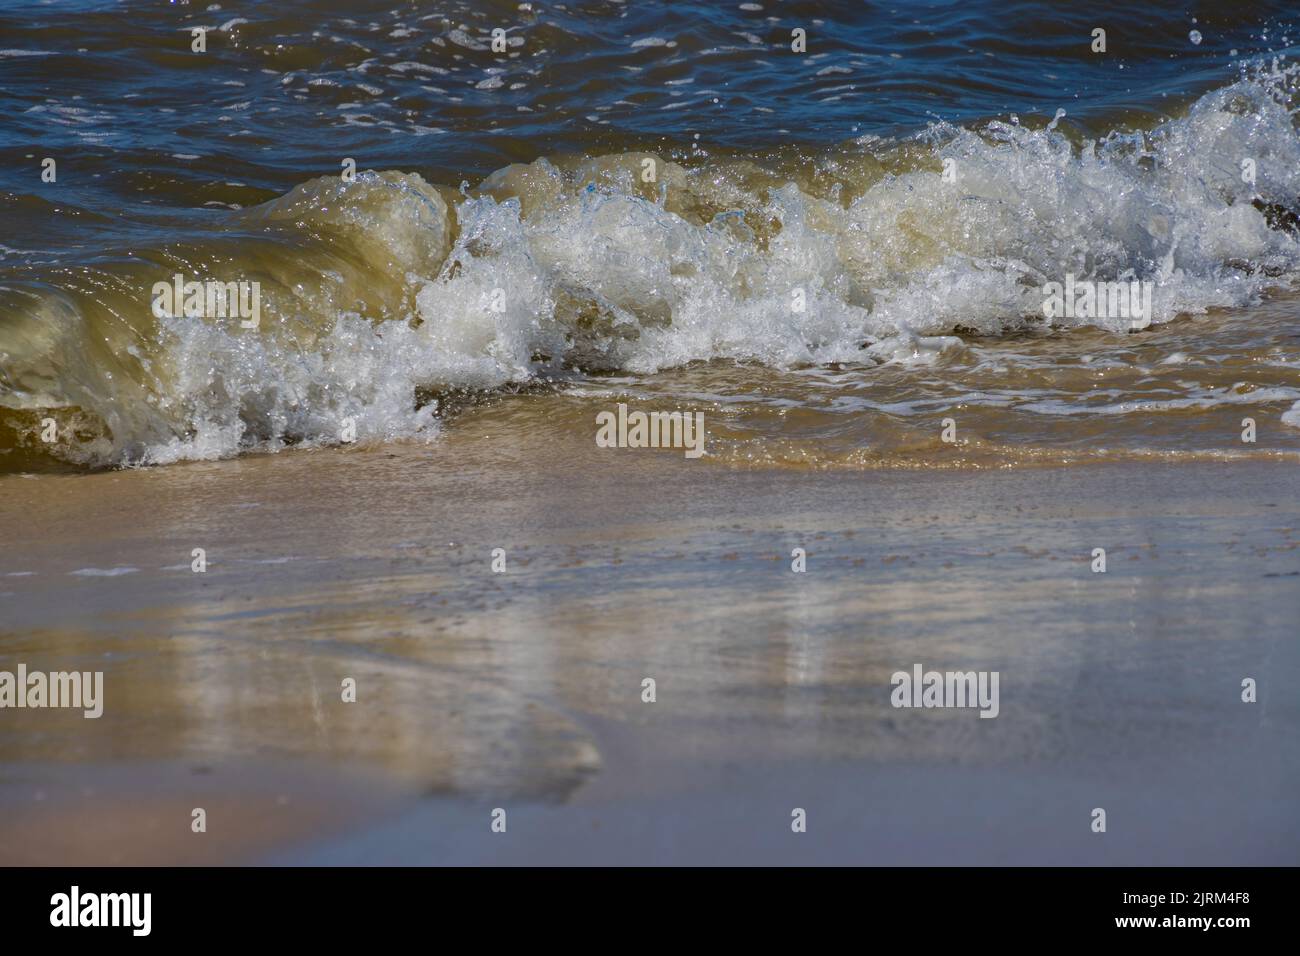 Breaking waves at a sandy beach on a sunny day Stock Photo